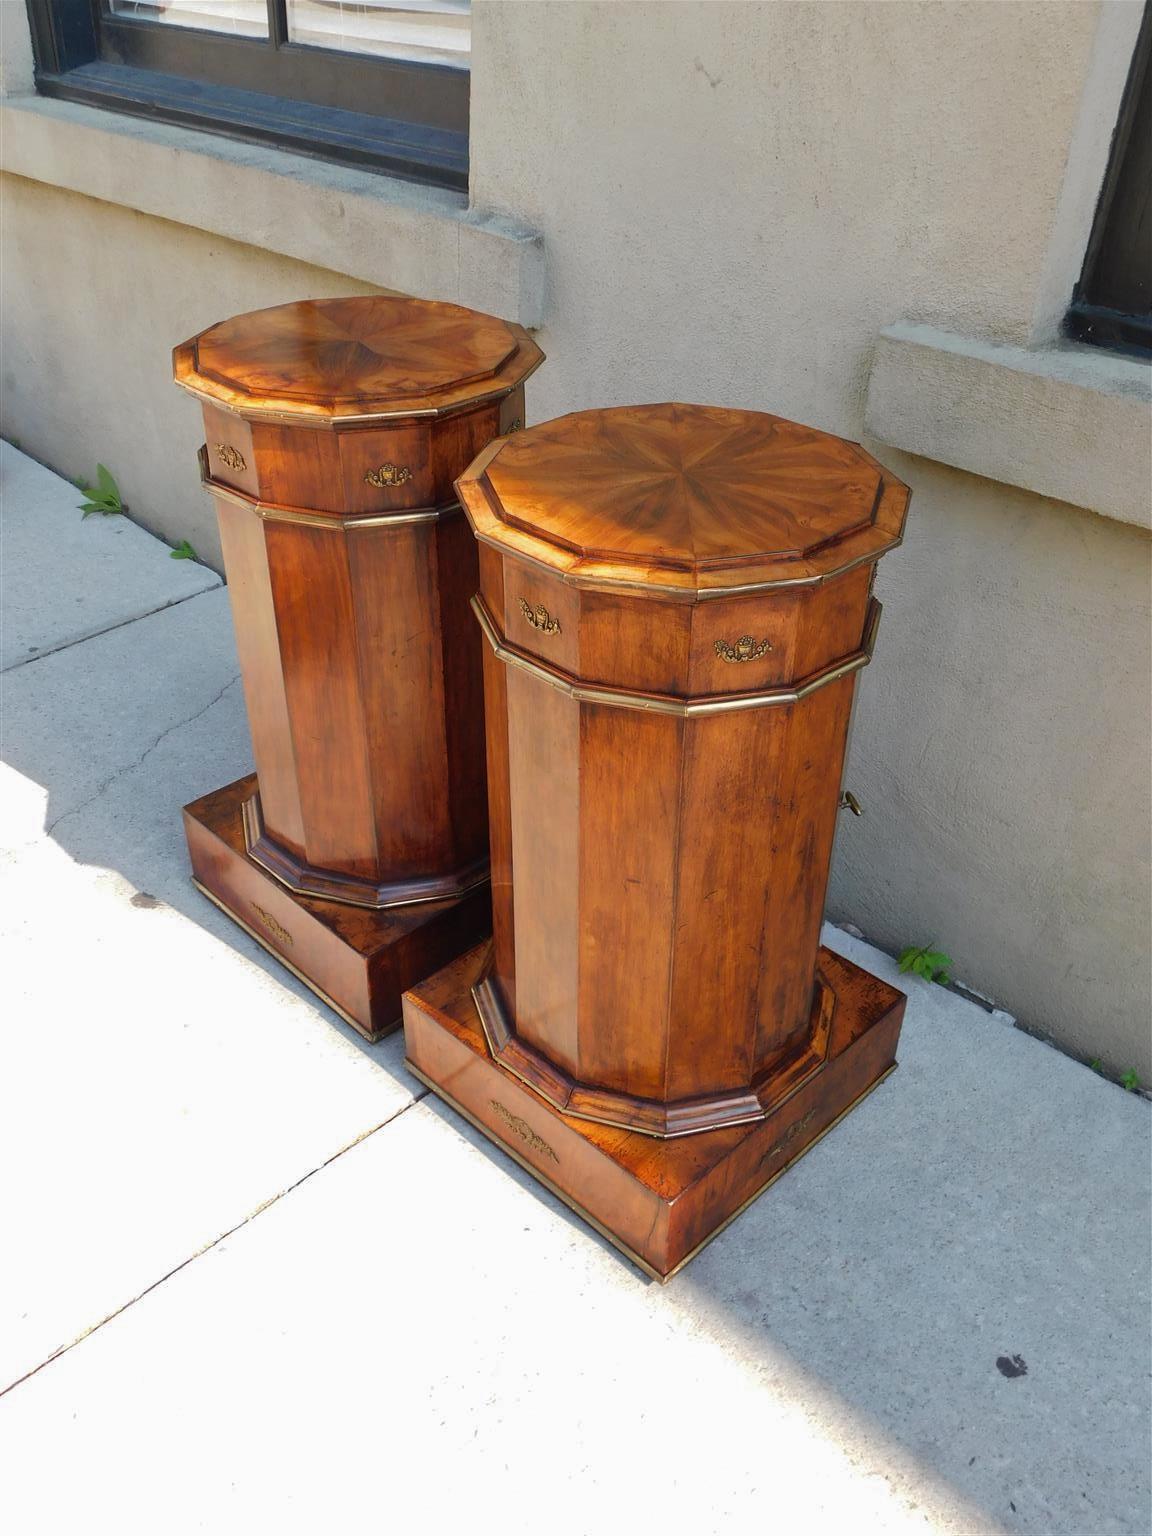 Pair of French Regency Mahogany Foliage Urn Ormolu Cabinet Commodes, Circa 1815 For Sale 4